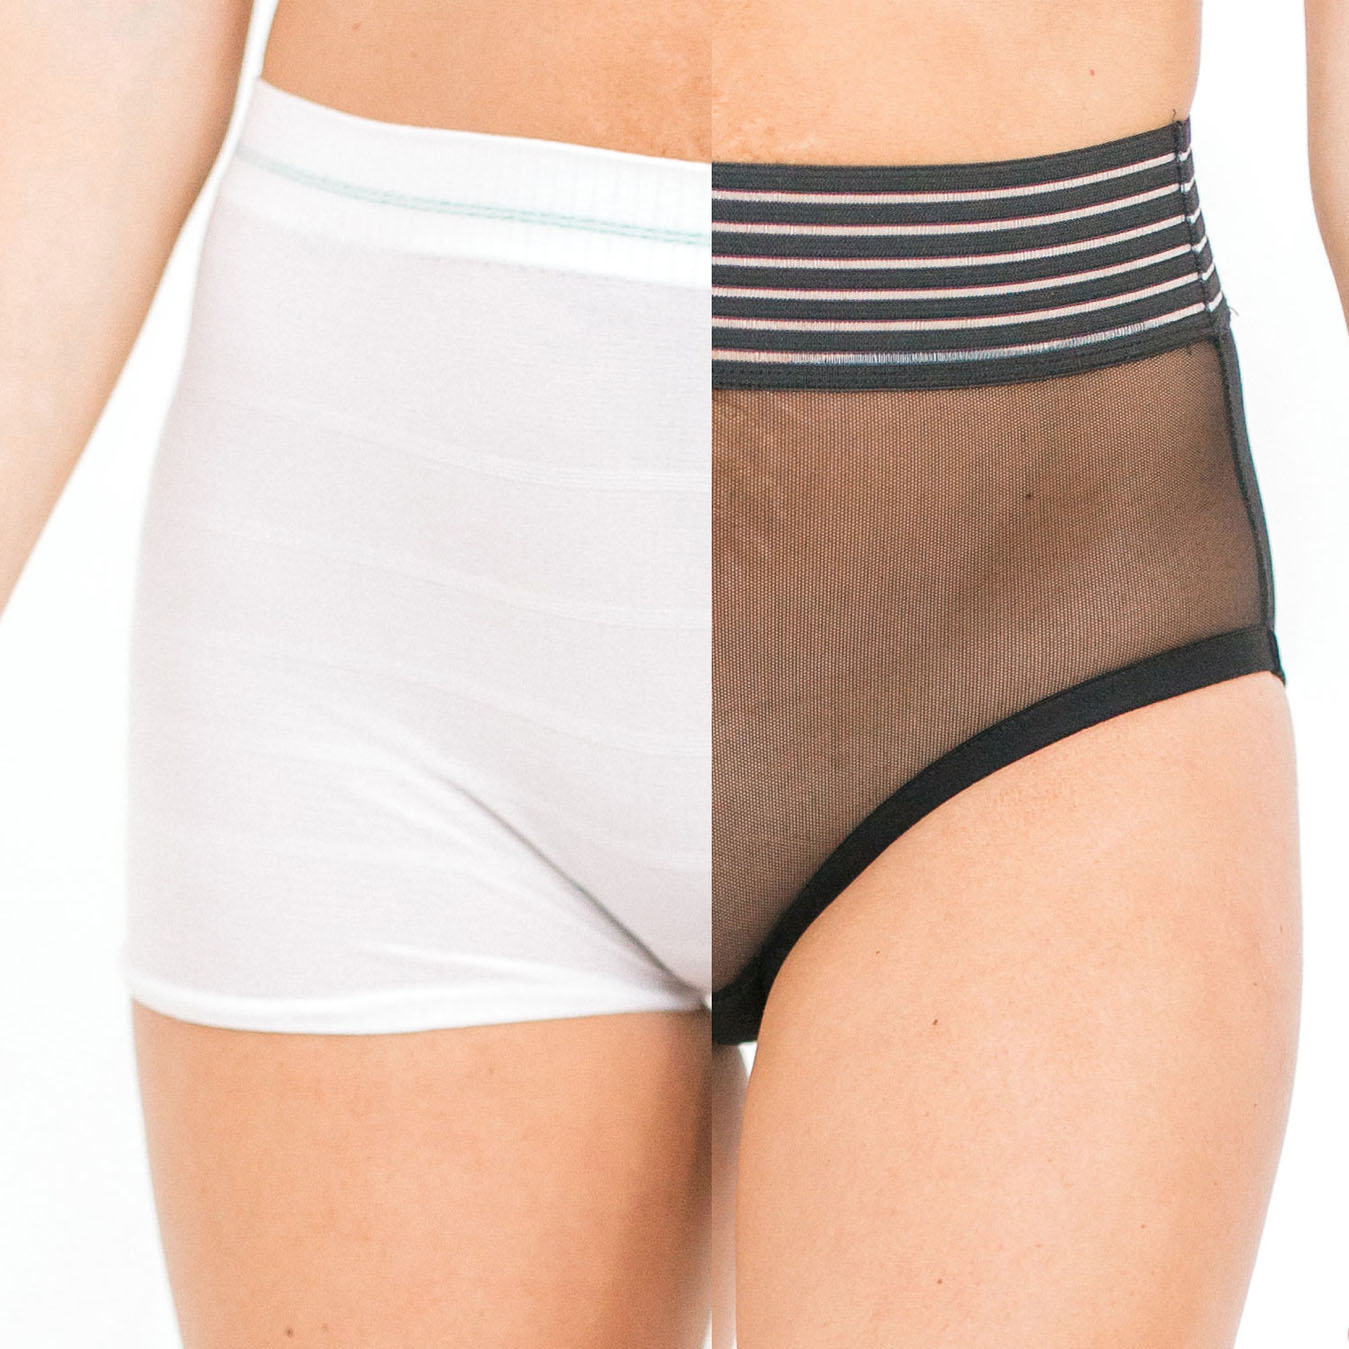 The Best Postpartum Underwear For Easing Into Life As A New Mom